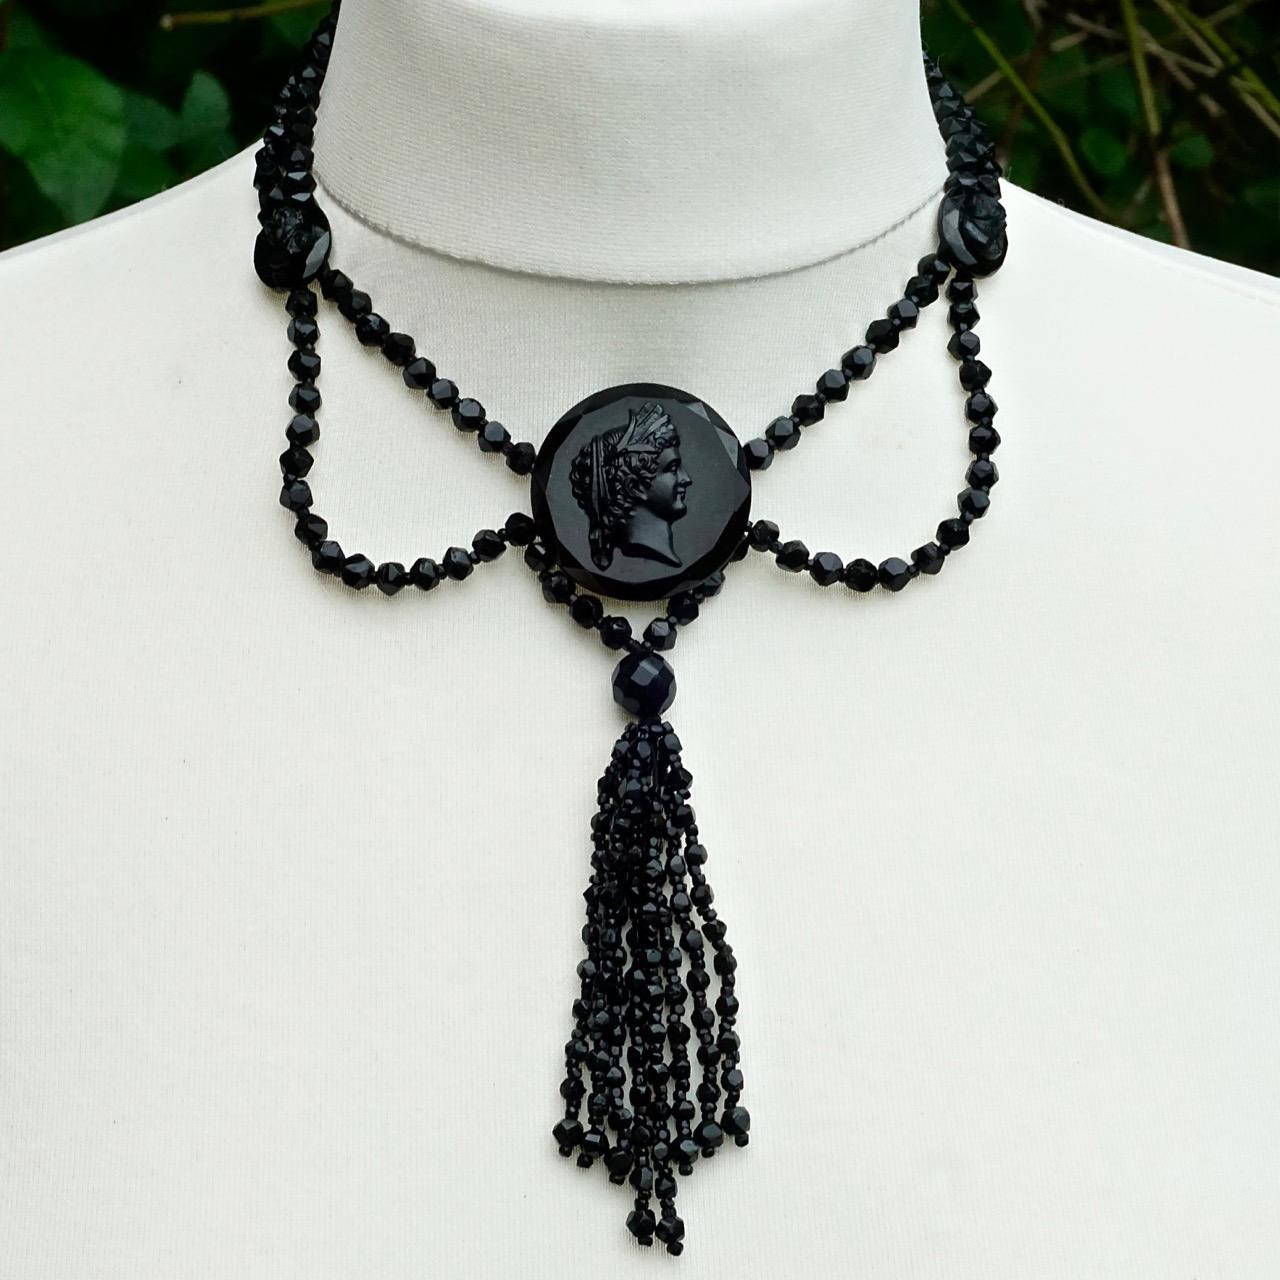 Antique Victorian festoon faceted french jet bead necklace with a sterling silver clasp, featuring three lovely cameos and finishing with a long tassel. The cameos have faceted edges and black enameled metal backs. Each hand cut bead is interspersed